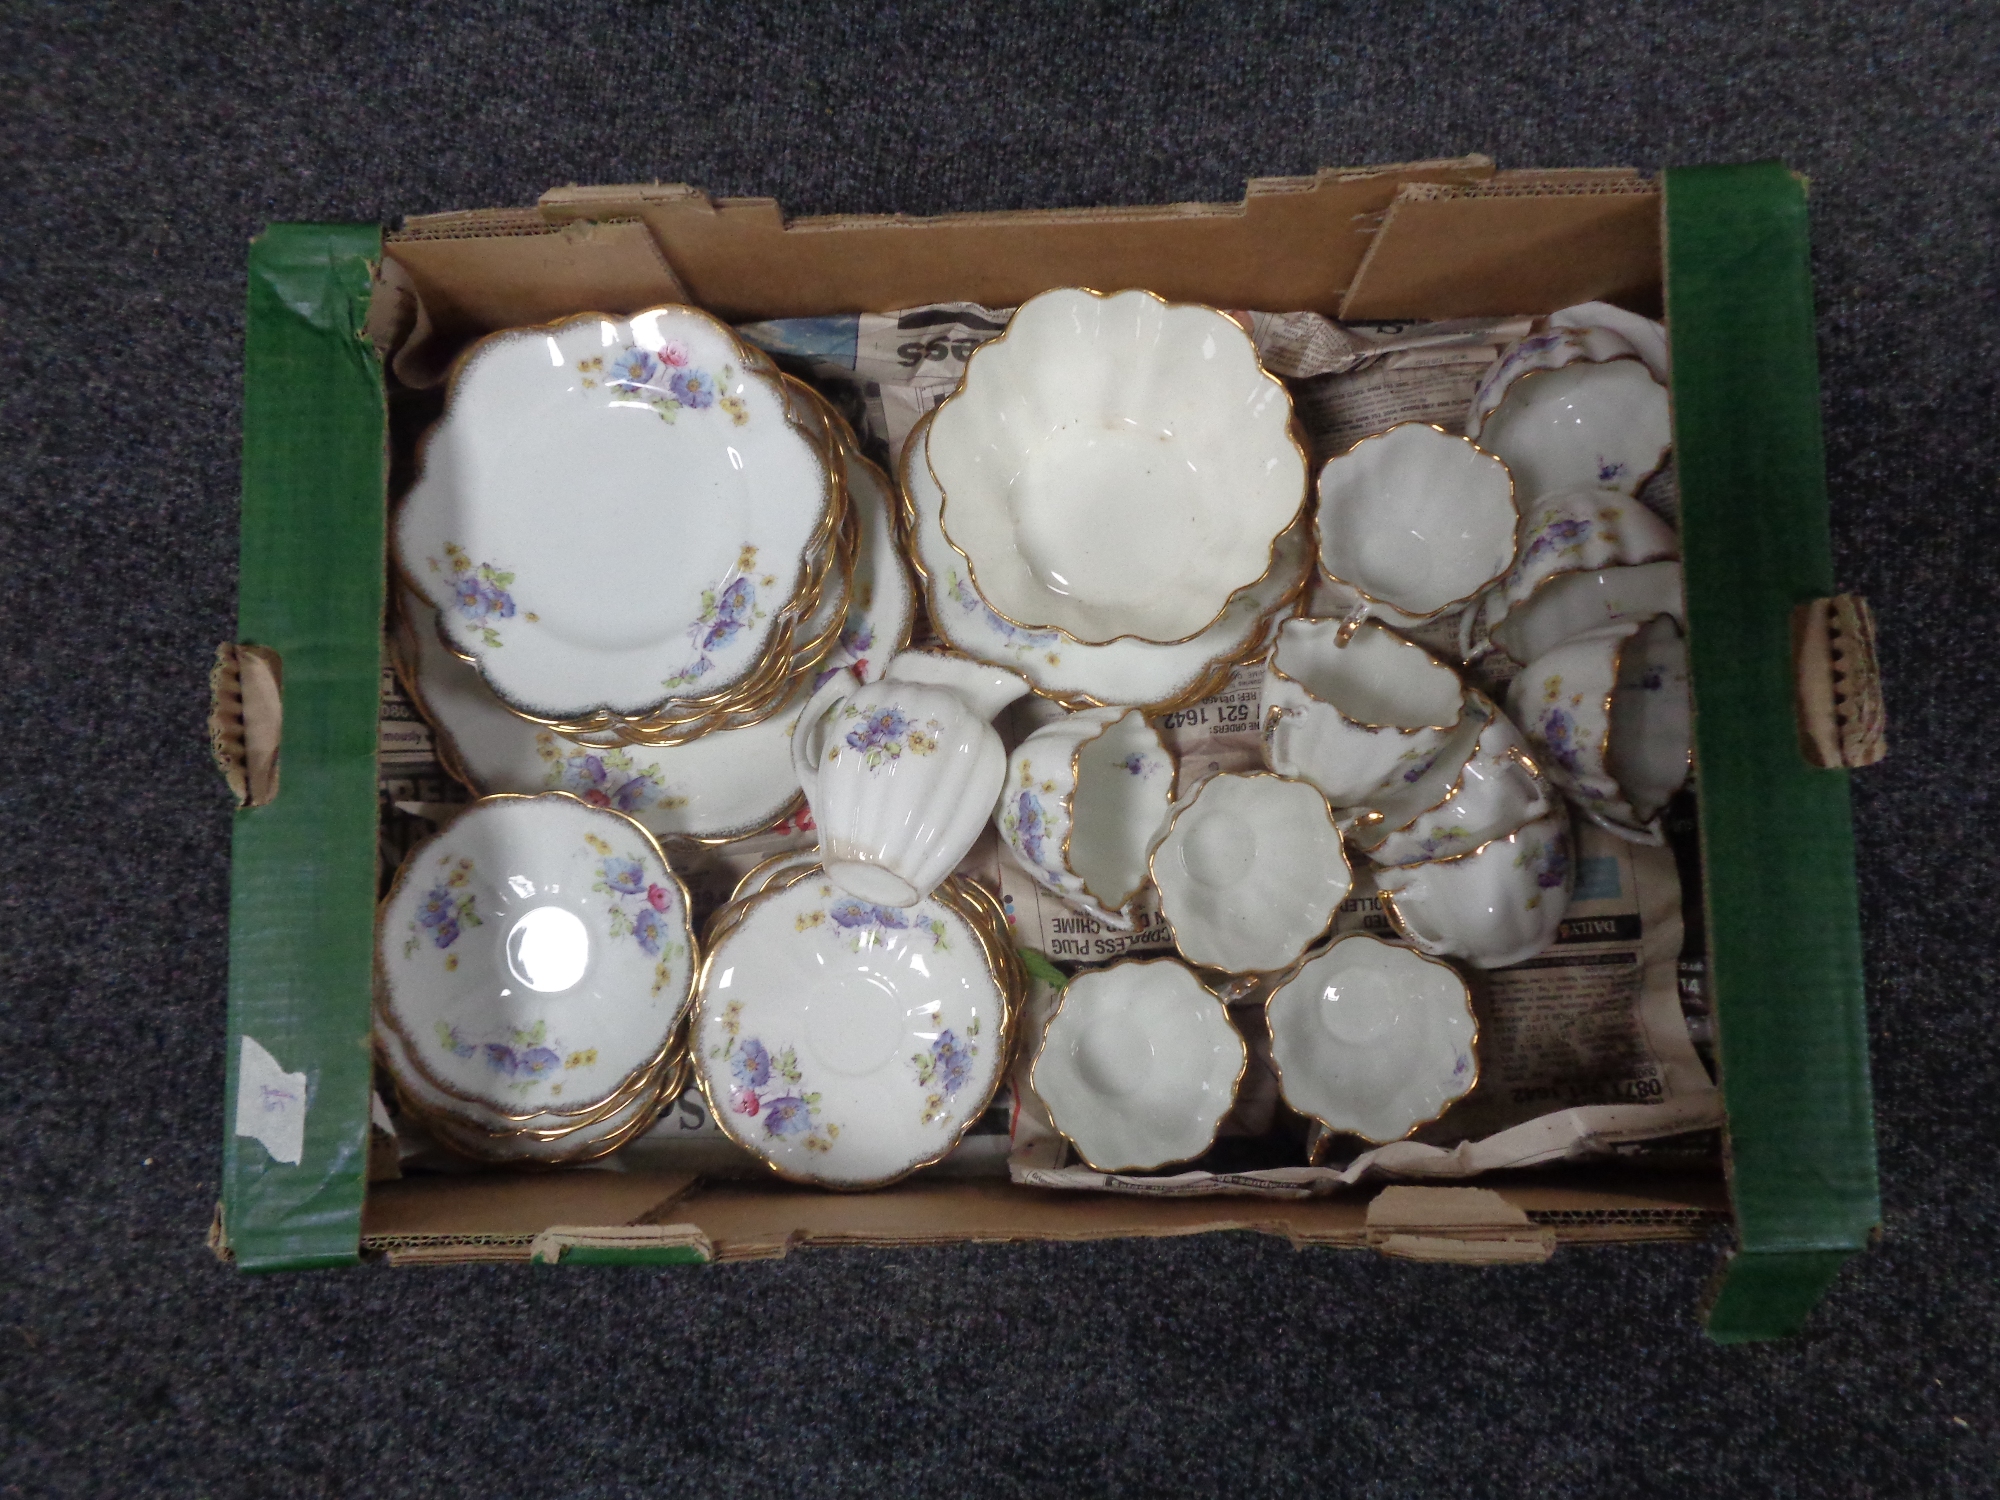 A tray containing a 28 piece gilt rimmed floral patterned china tea service.